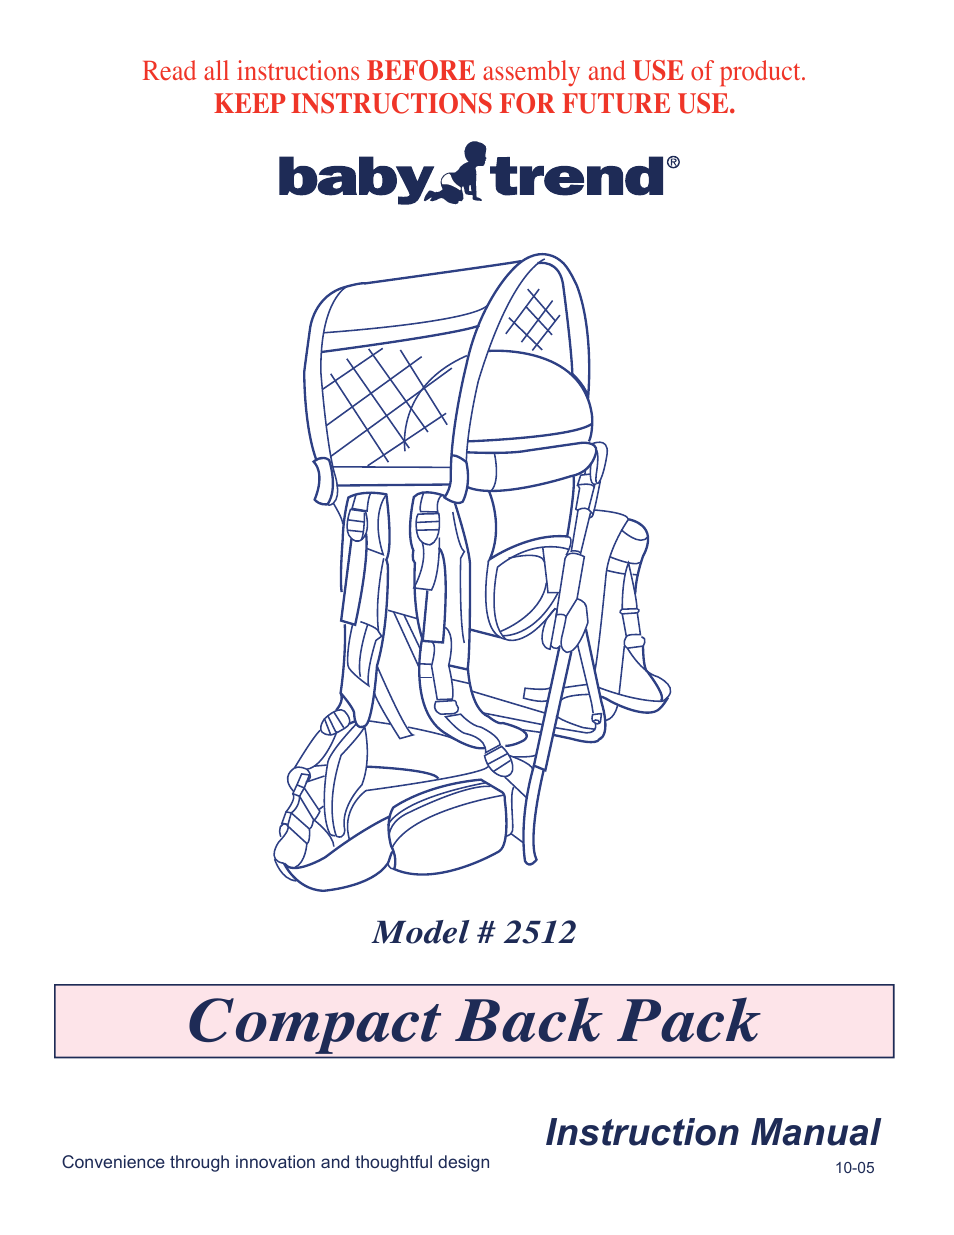 Compact Back Pack 2512